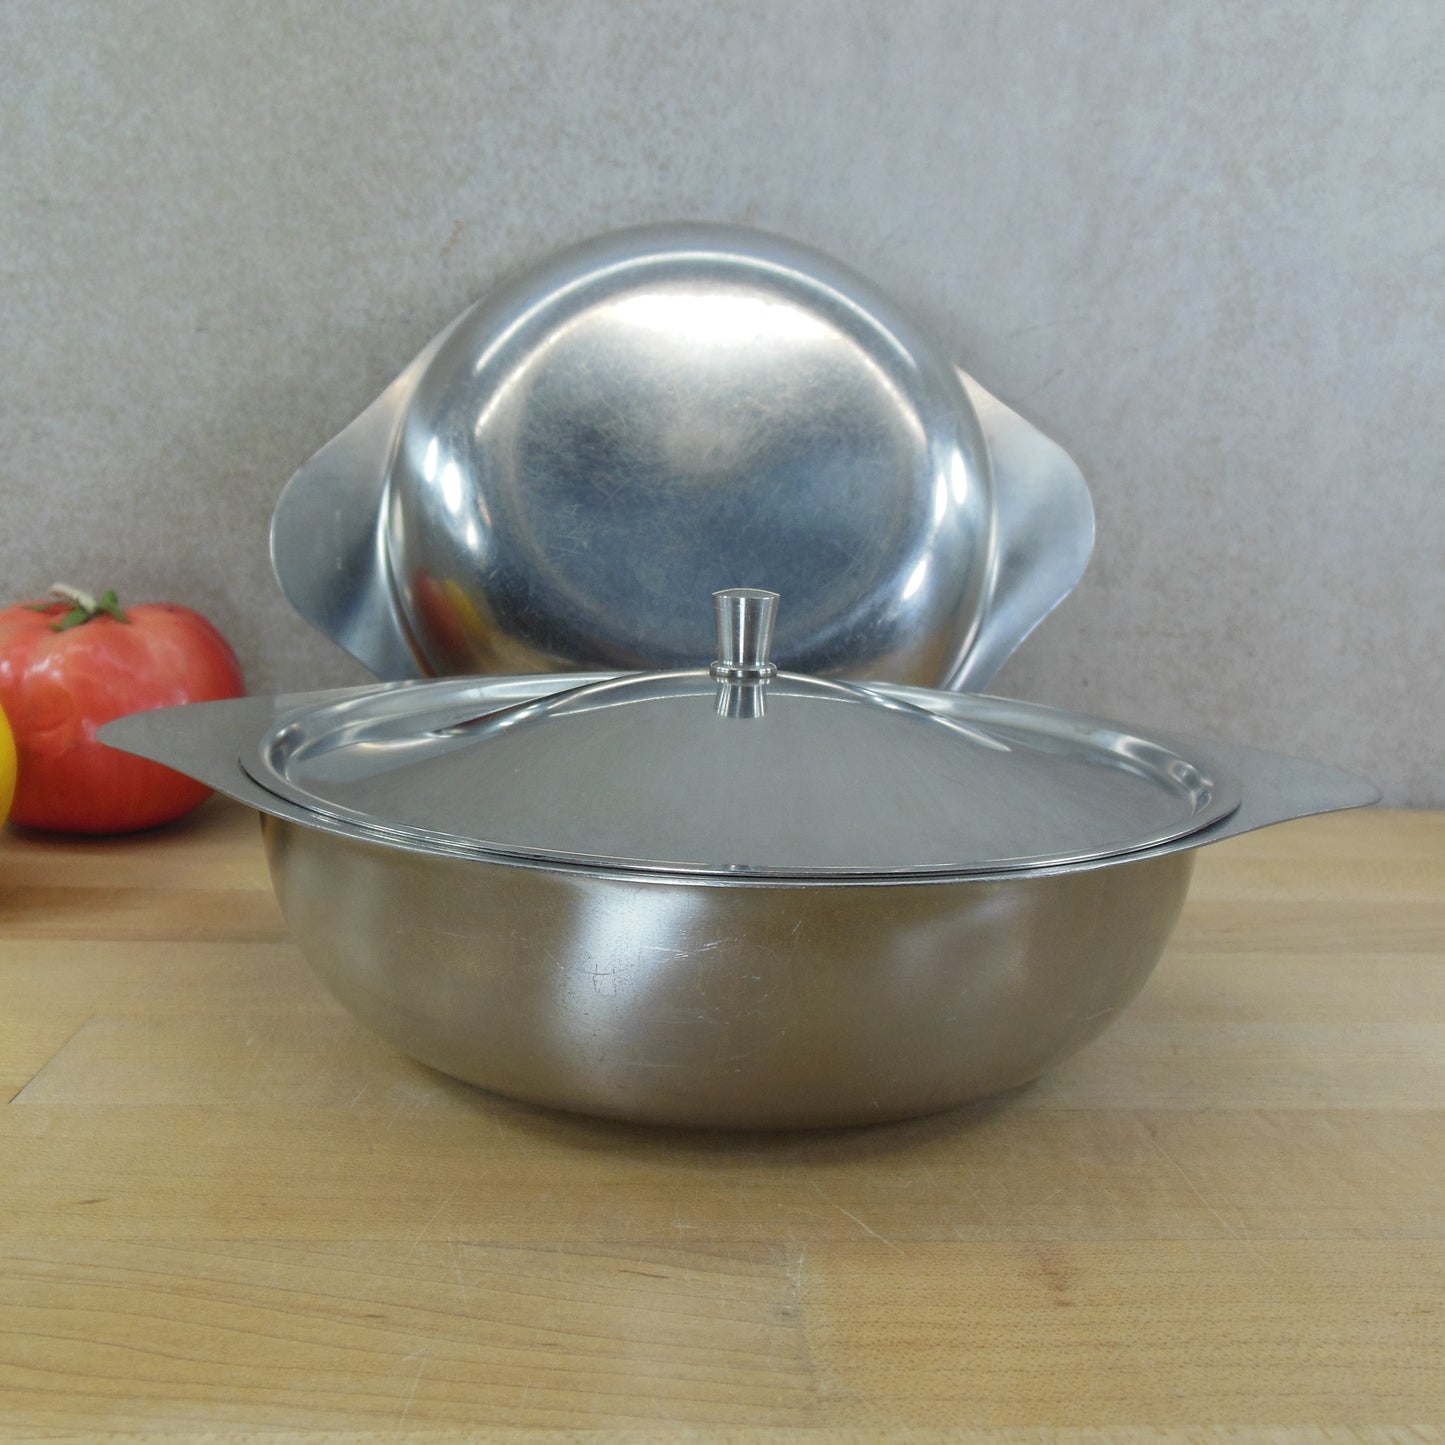 Broms Sweden 18-8 Stainless Covered and Open Serving Bowls MCM